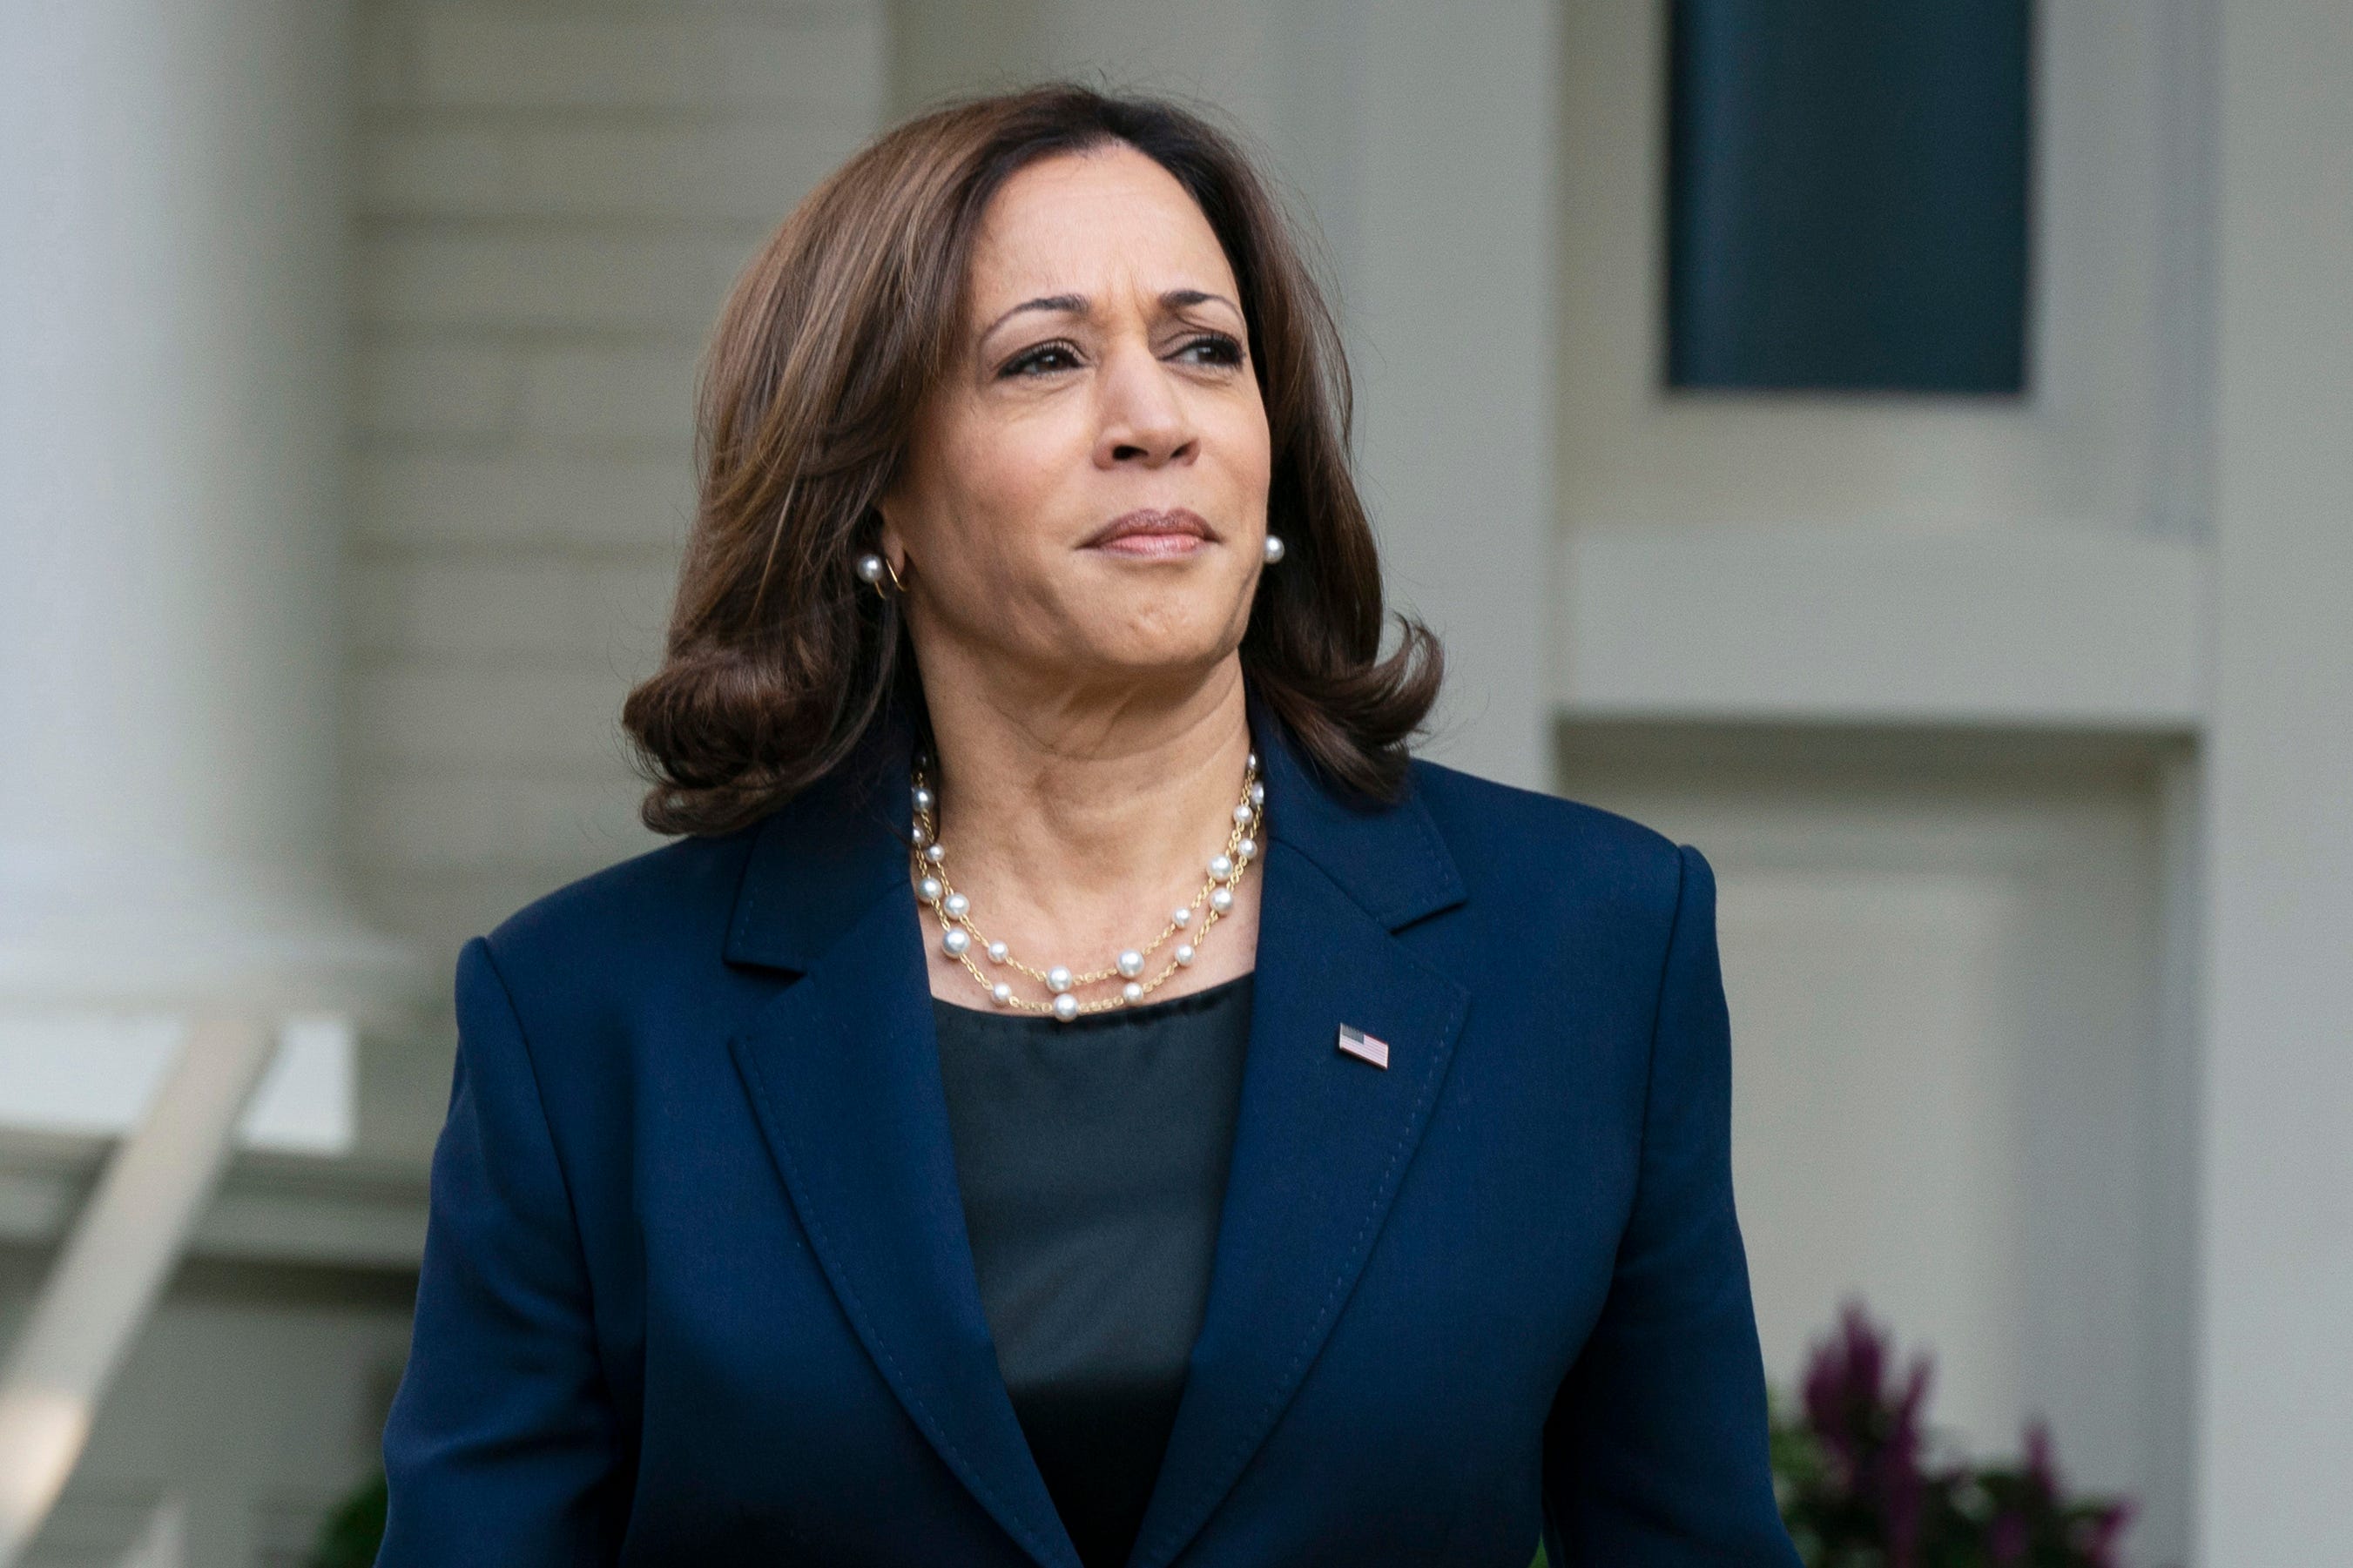 Kamala Harris to mark Roe v. Wade anniversary in Florida by urging greater abortion access